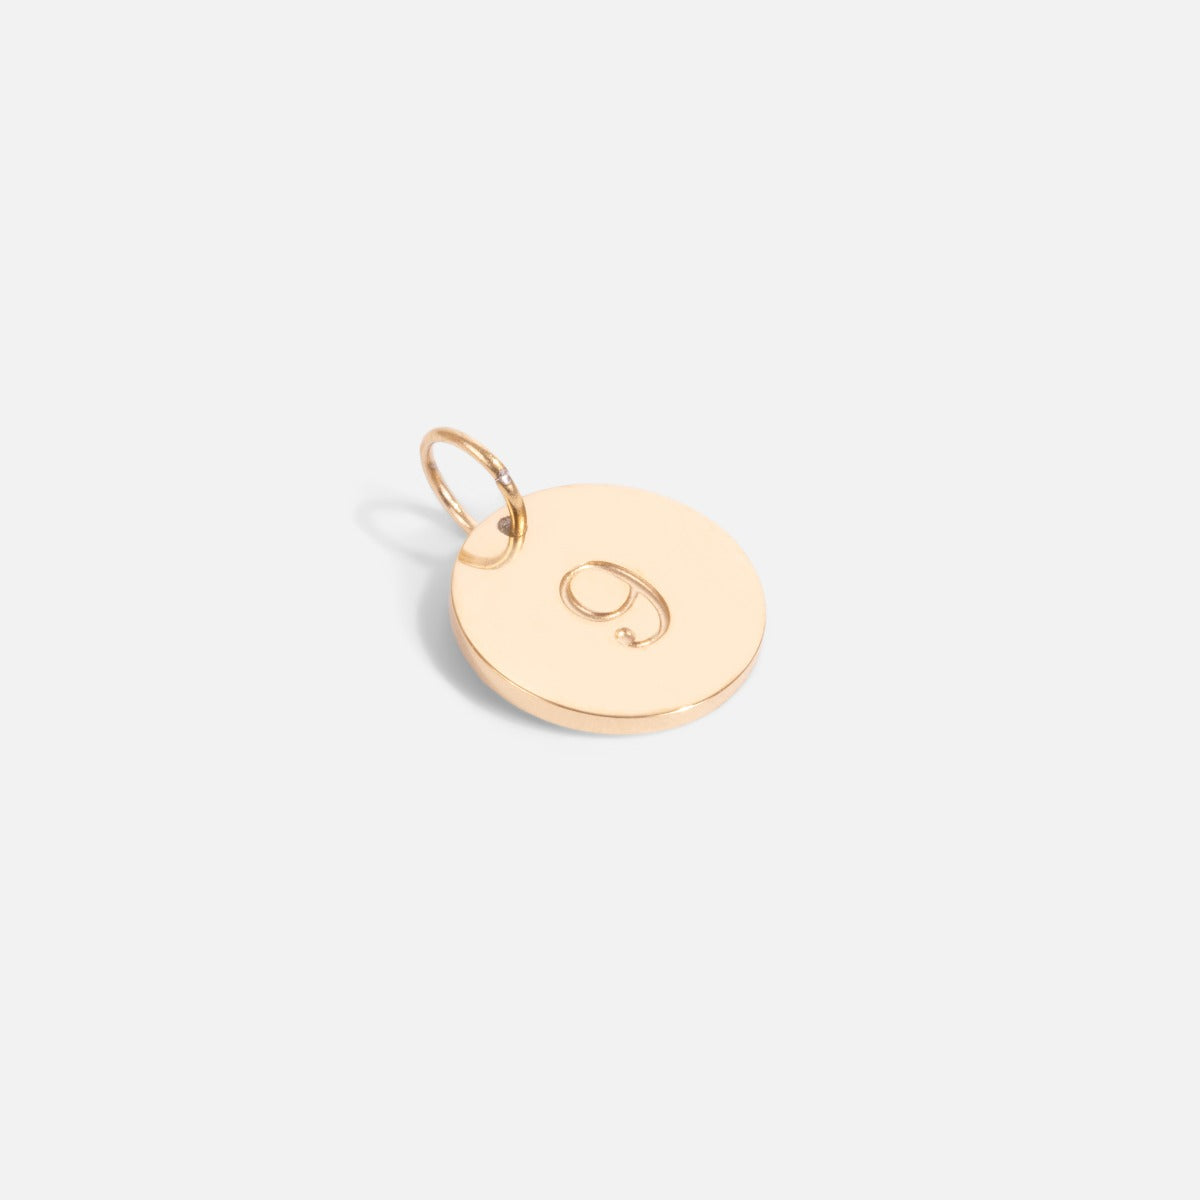 Small golden charm engraved with the number "9"   